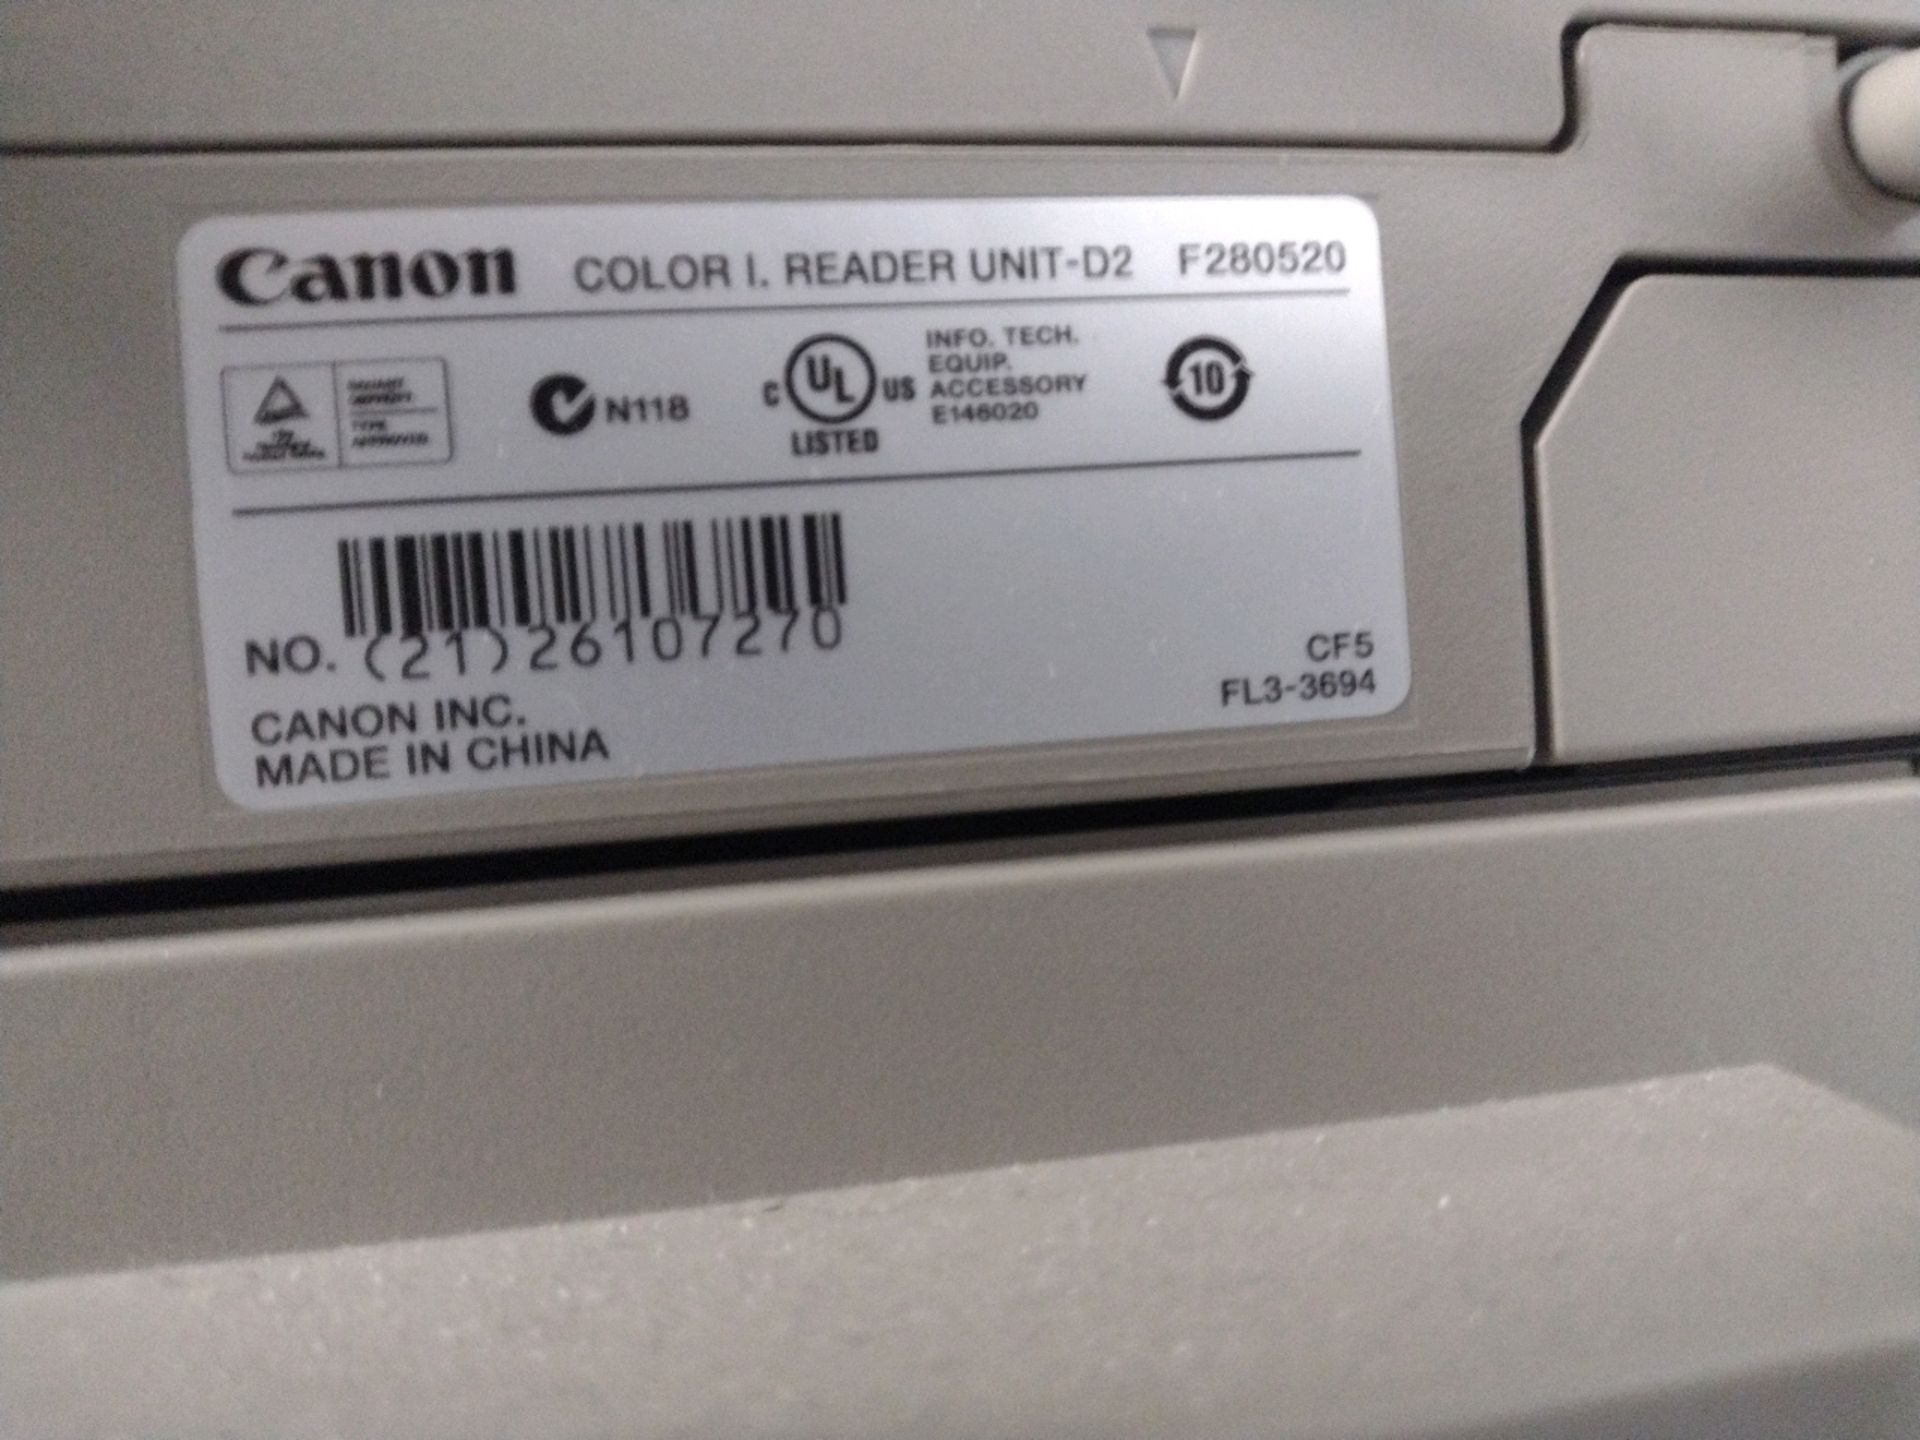 CANON IMAGERUNNER ADVANCE MULTIFUNCTION COPIER - Image 4 of 4